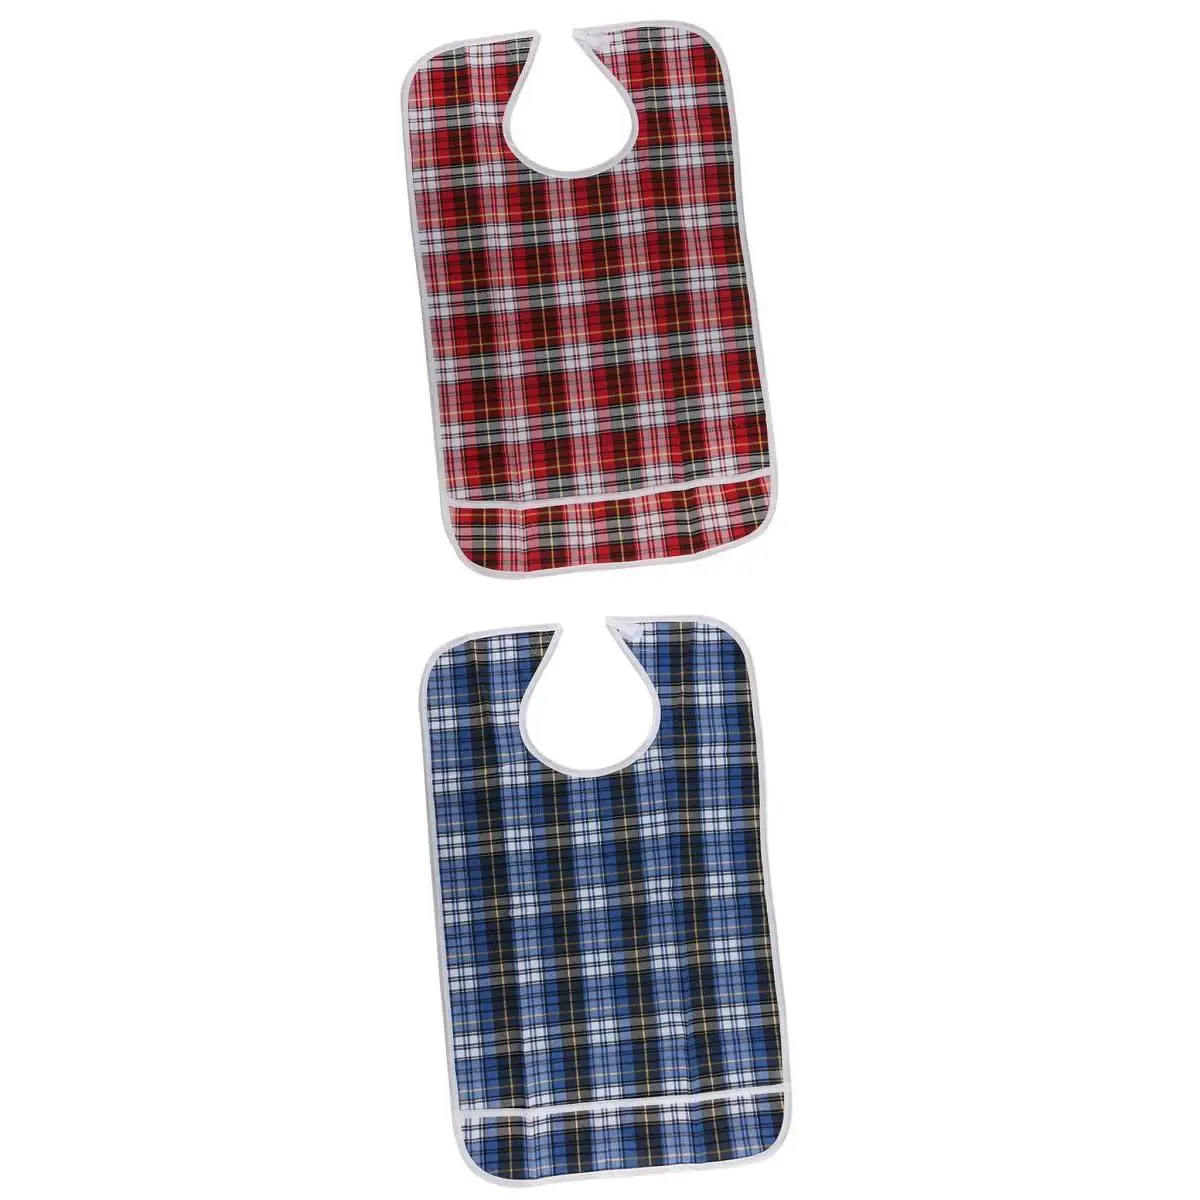 2 Pcs Large Adult Bib Reusable Mealtime Protector Disability Aid Apron Prevent Spill Washable for Eldely Hospital